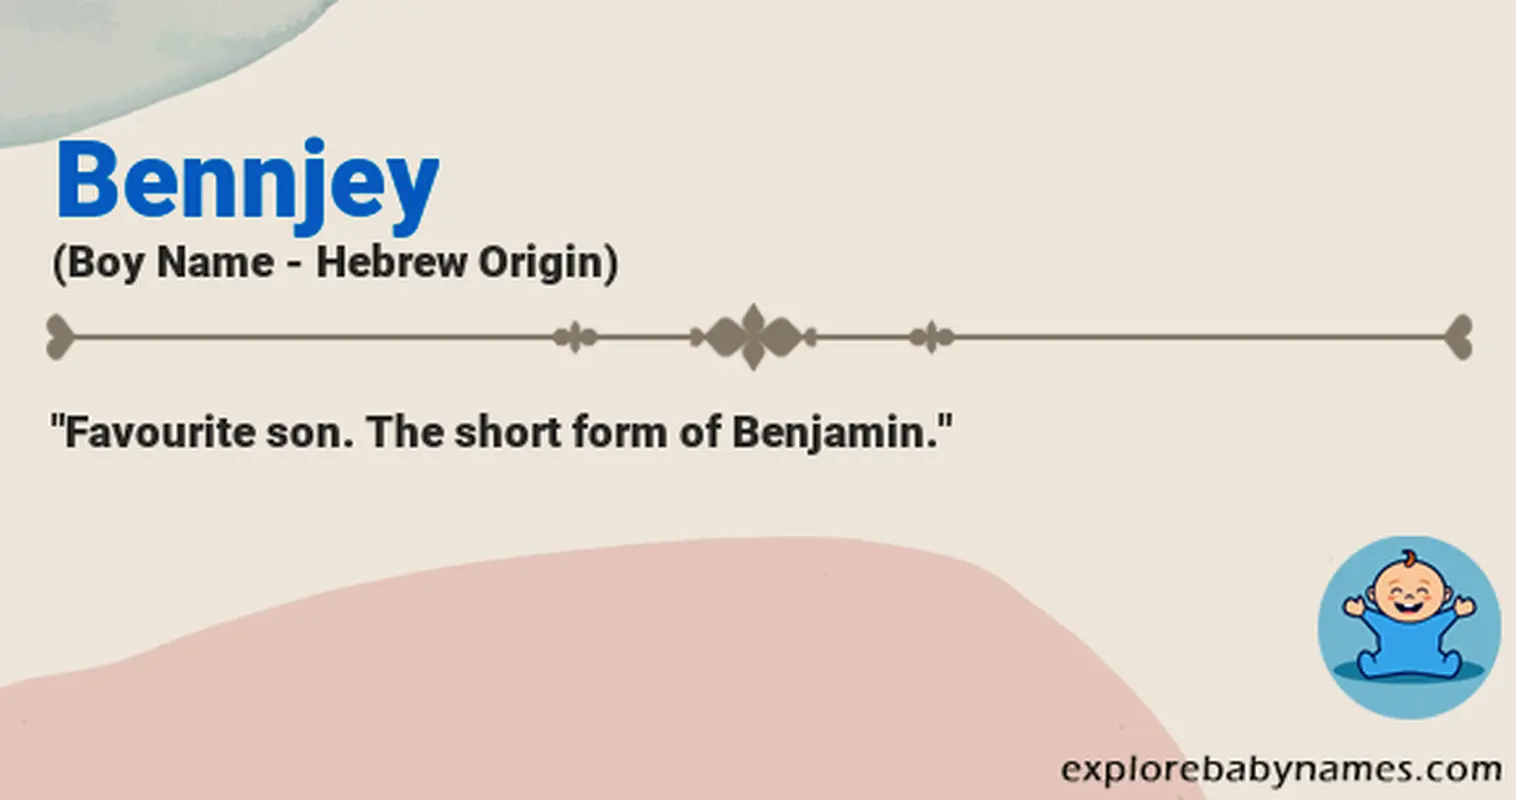 Meaning of Bennjey